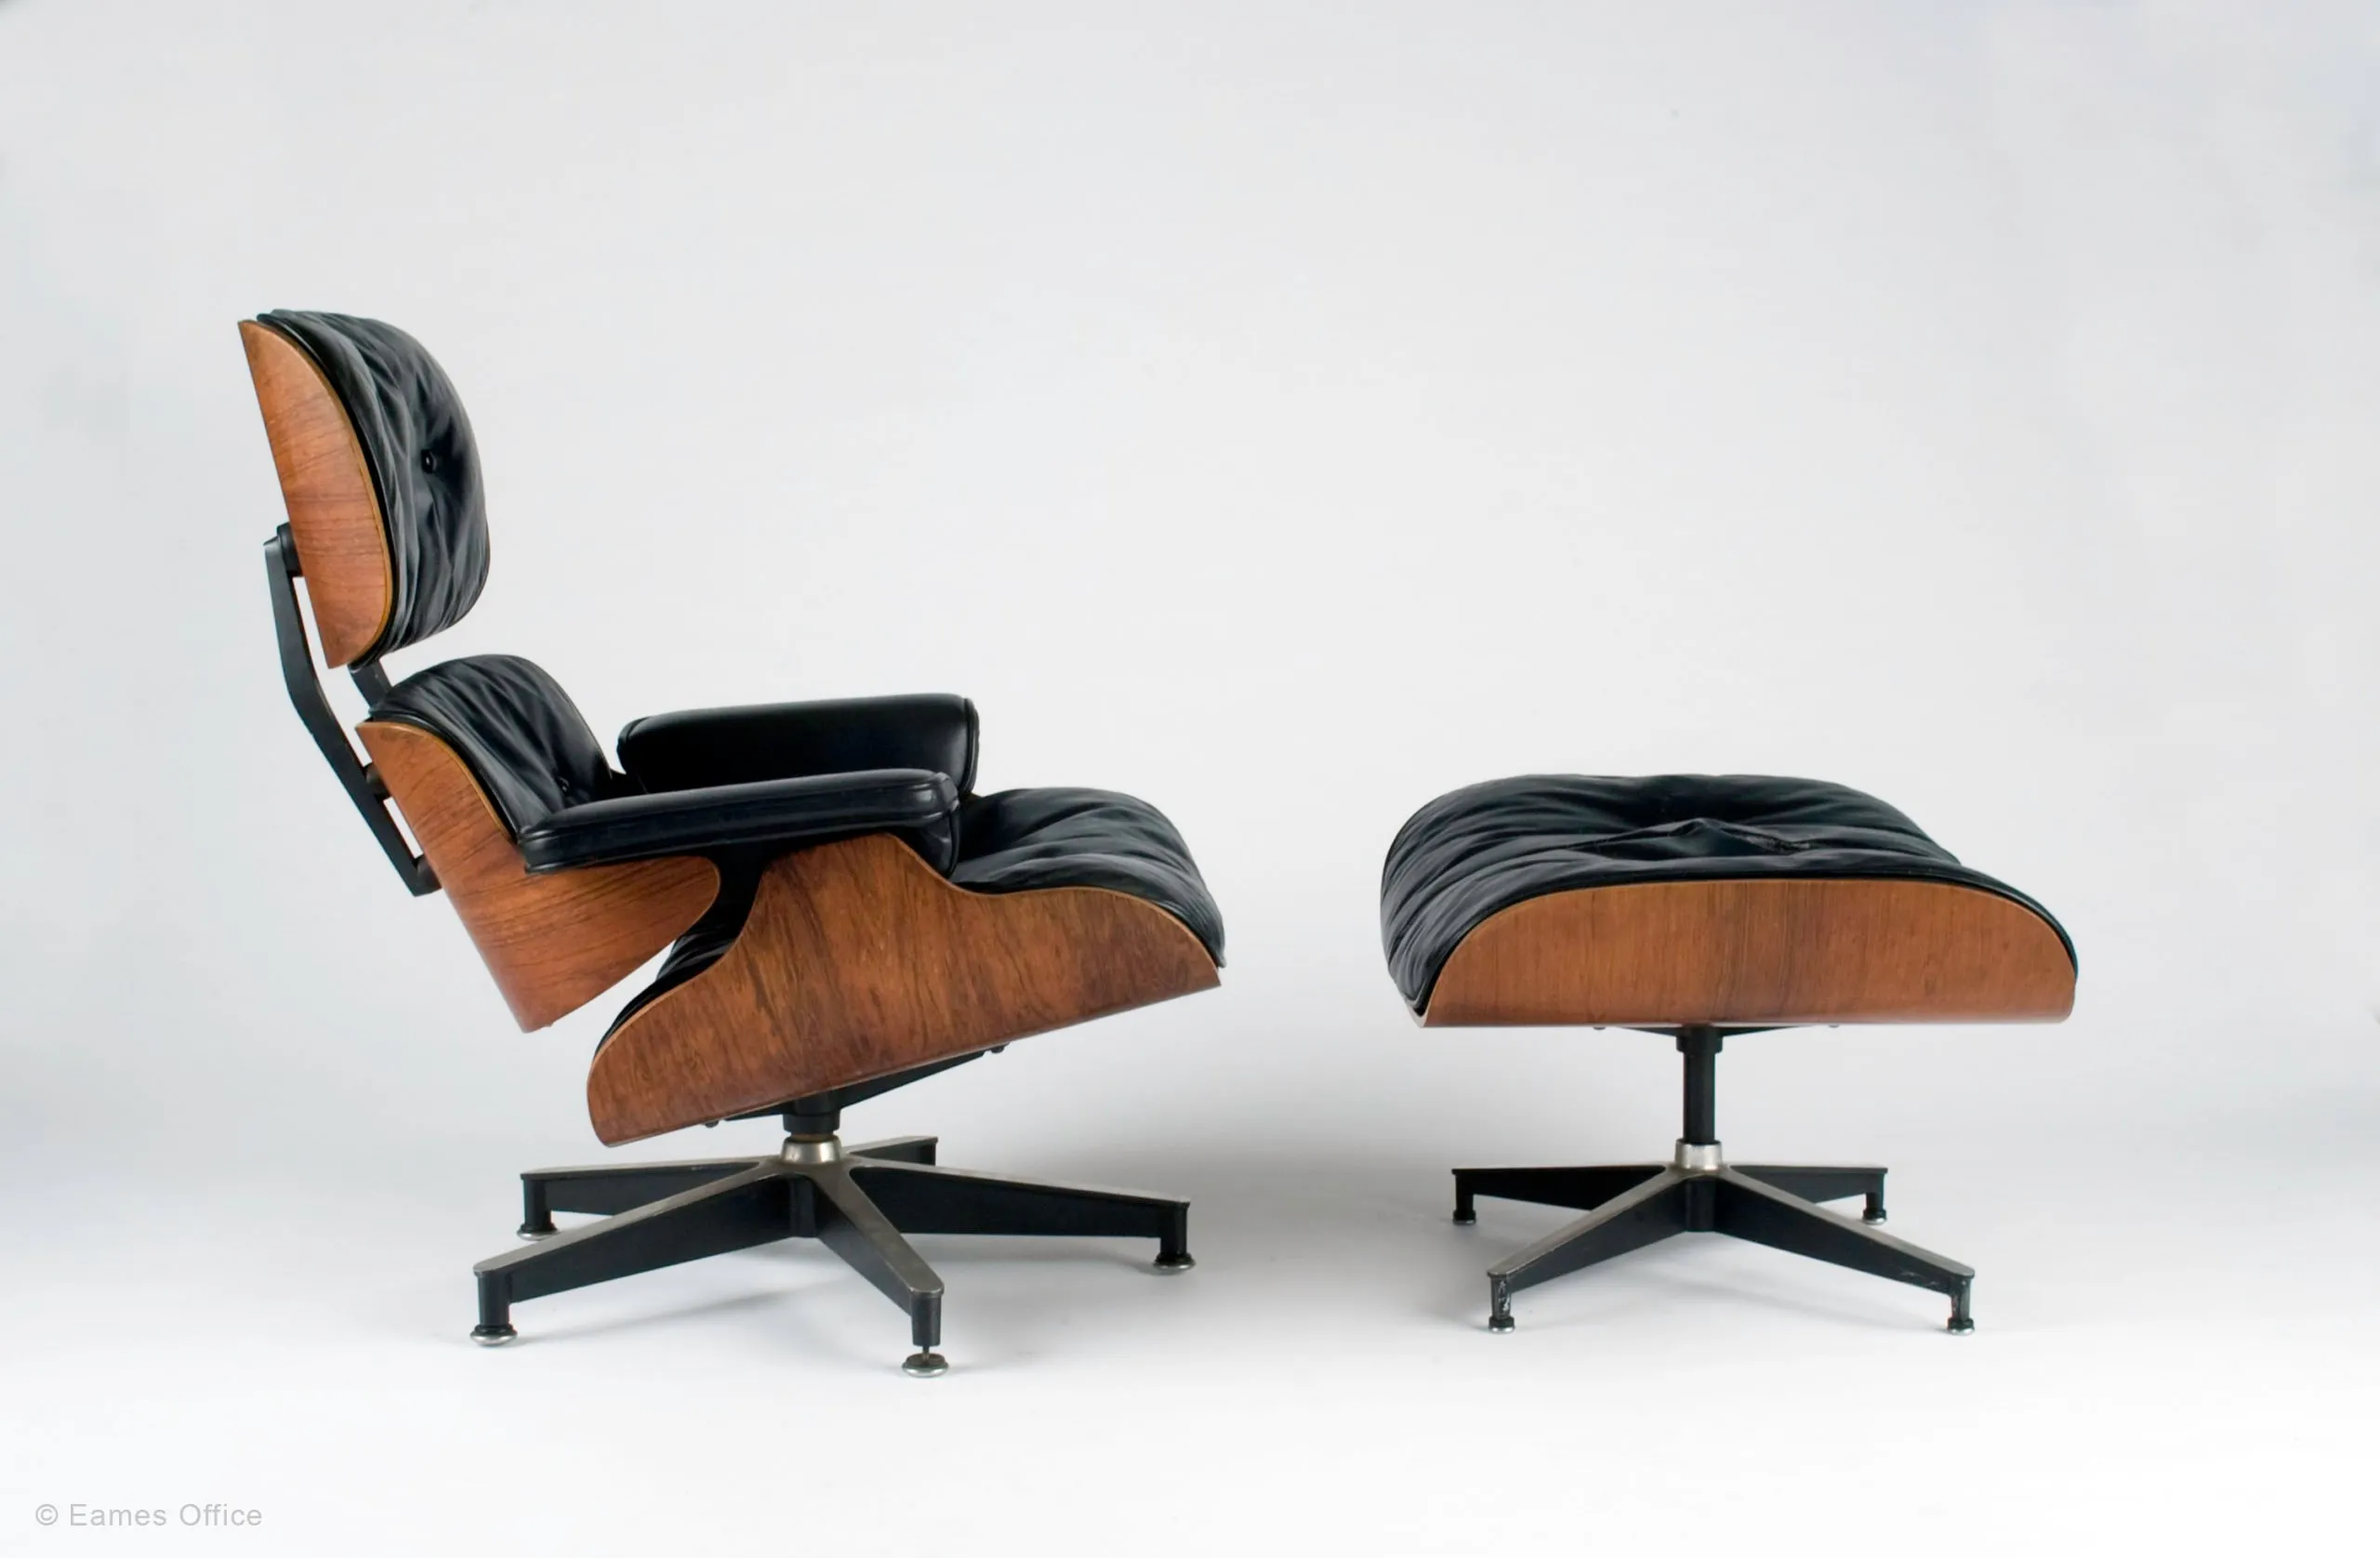 The Eames Lounge Chair and Ottoman Set